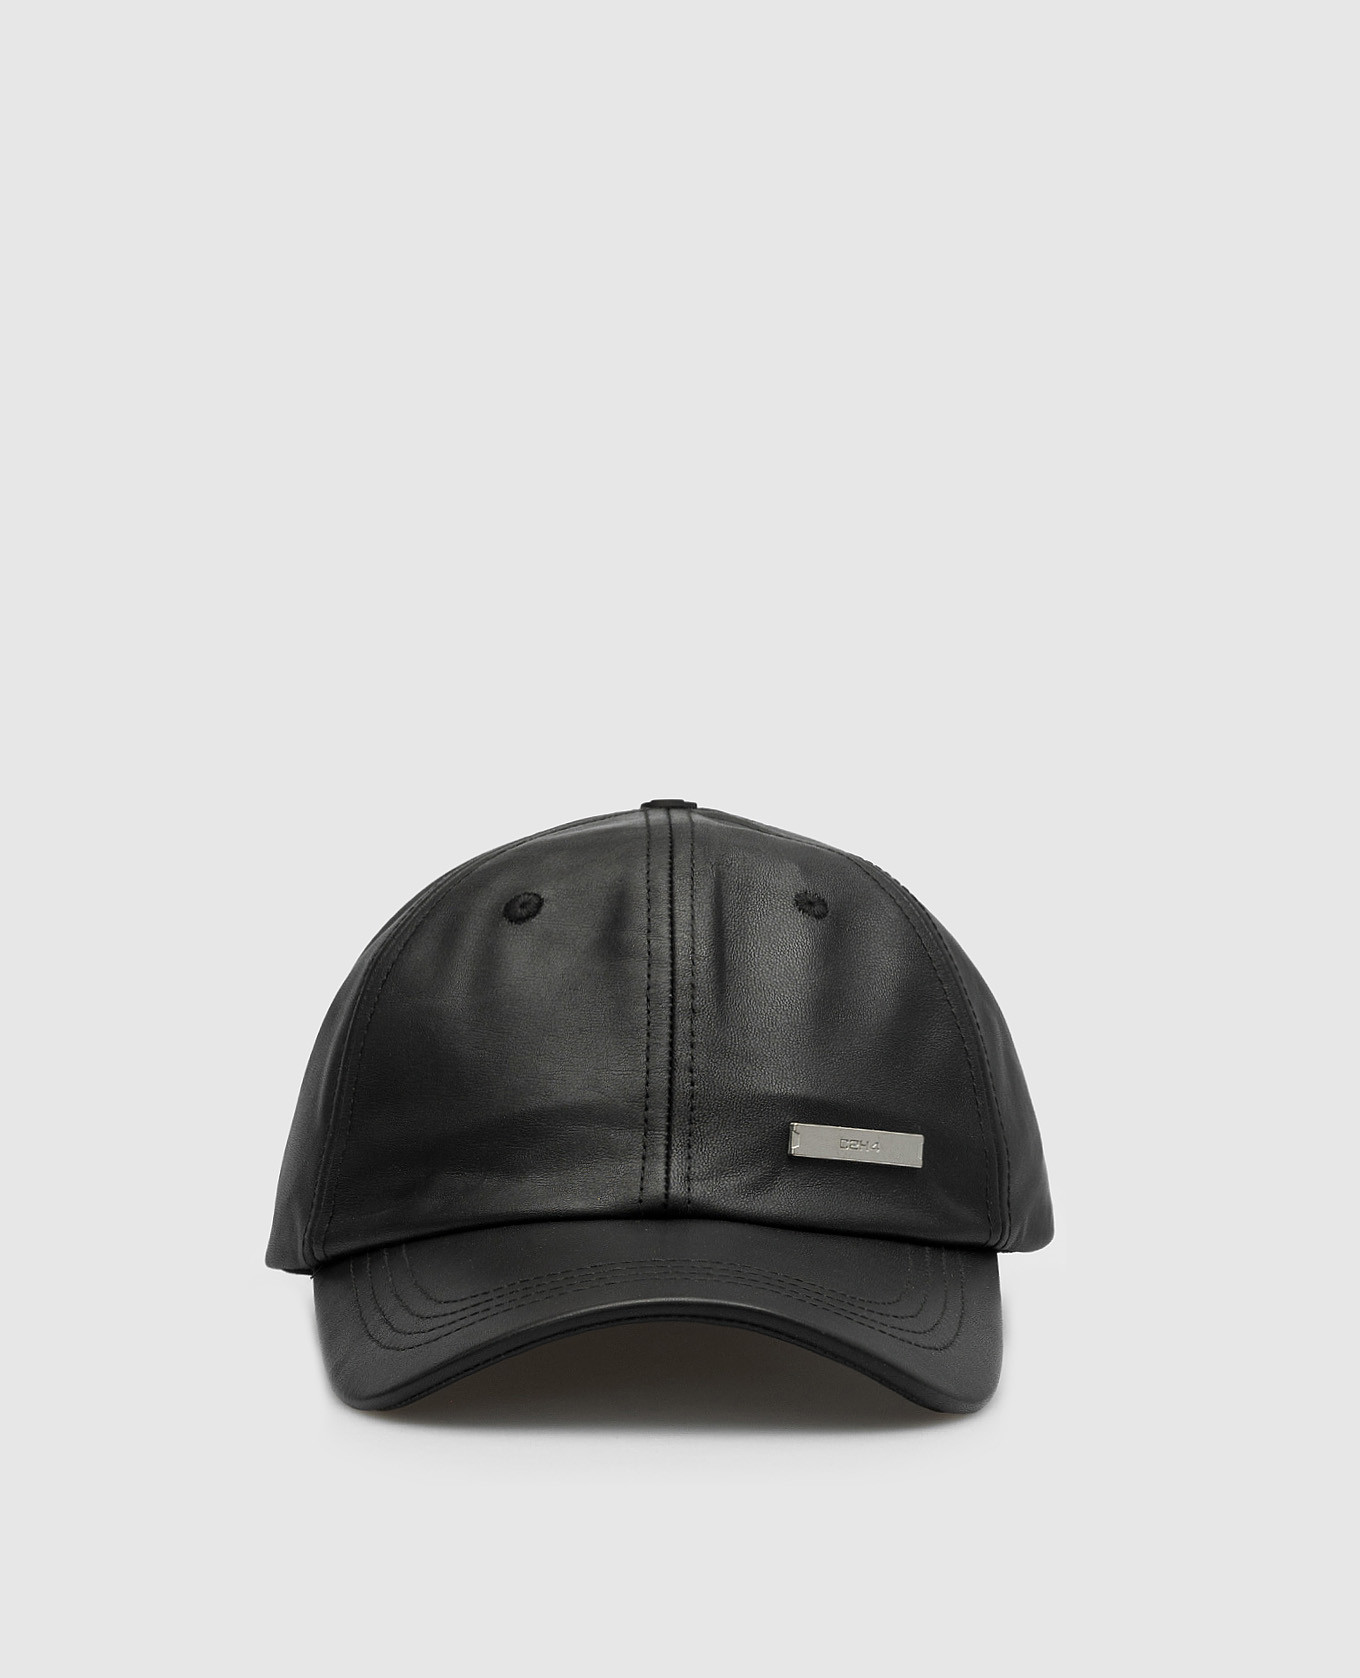 Black leather cap with logo